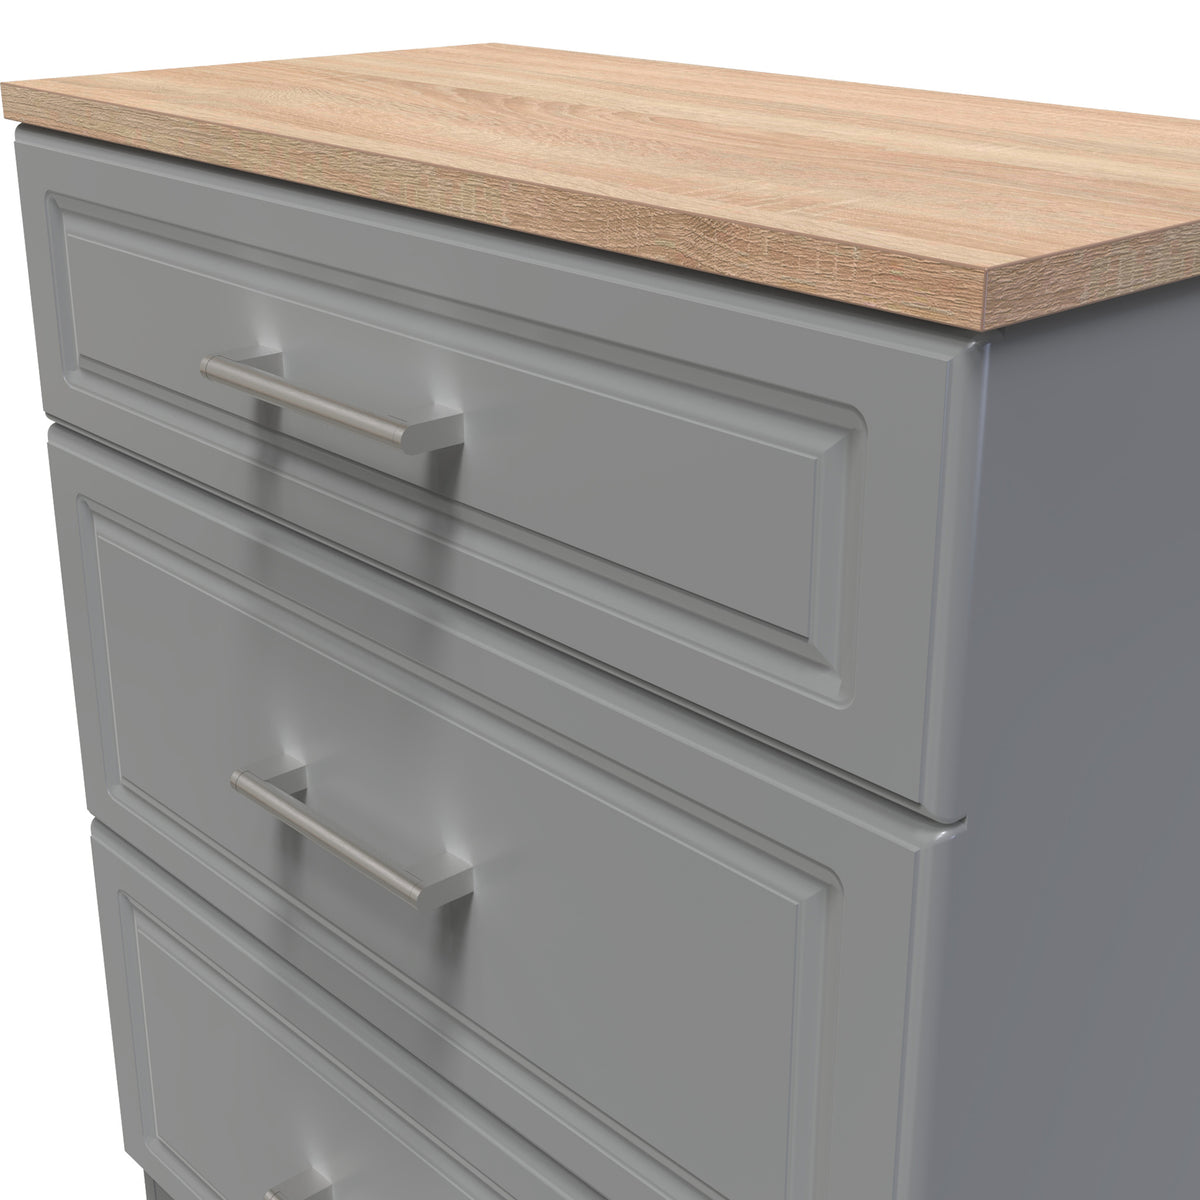 Talland Grey 3 Drawer Deep Chest by Roseland Furniture